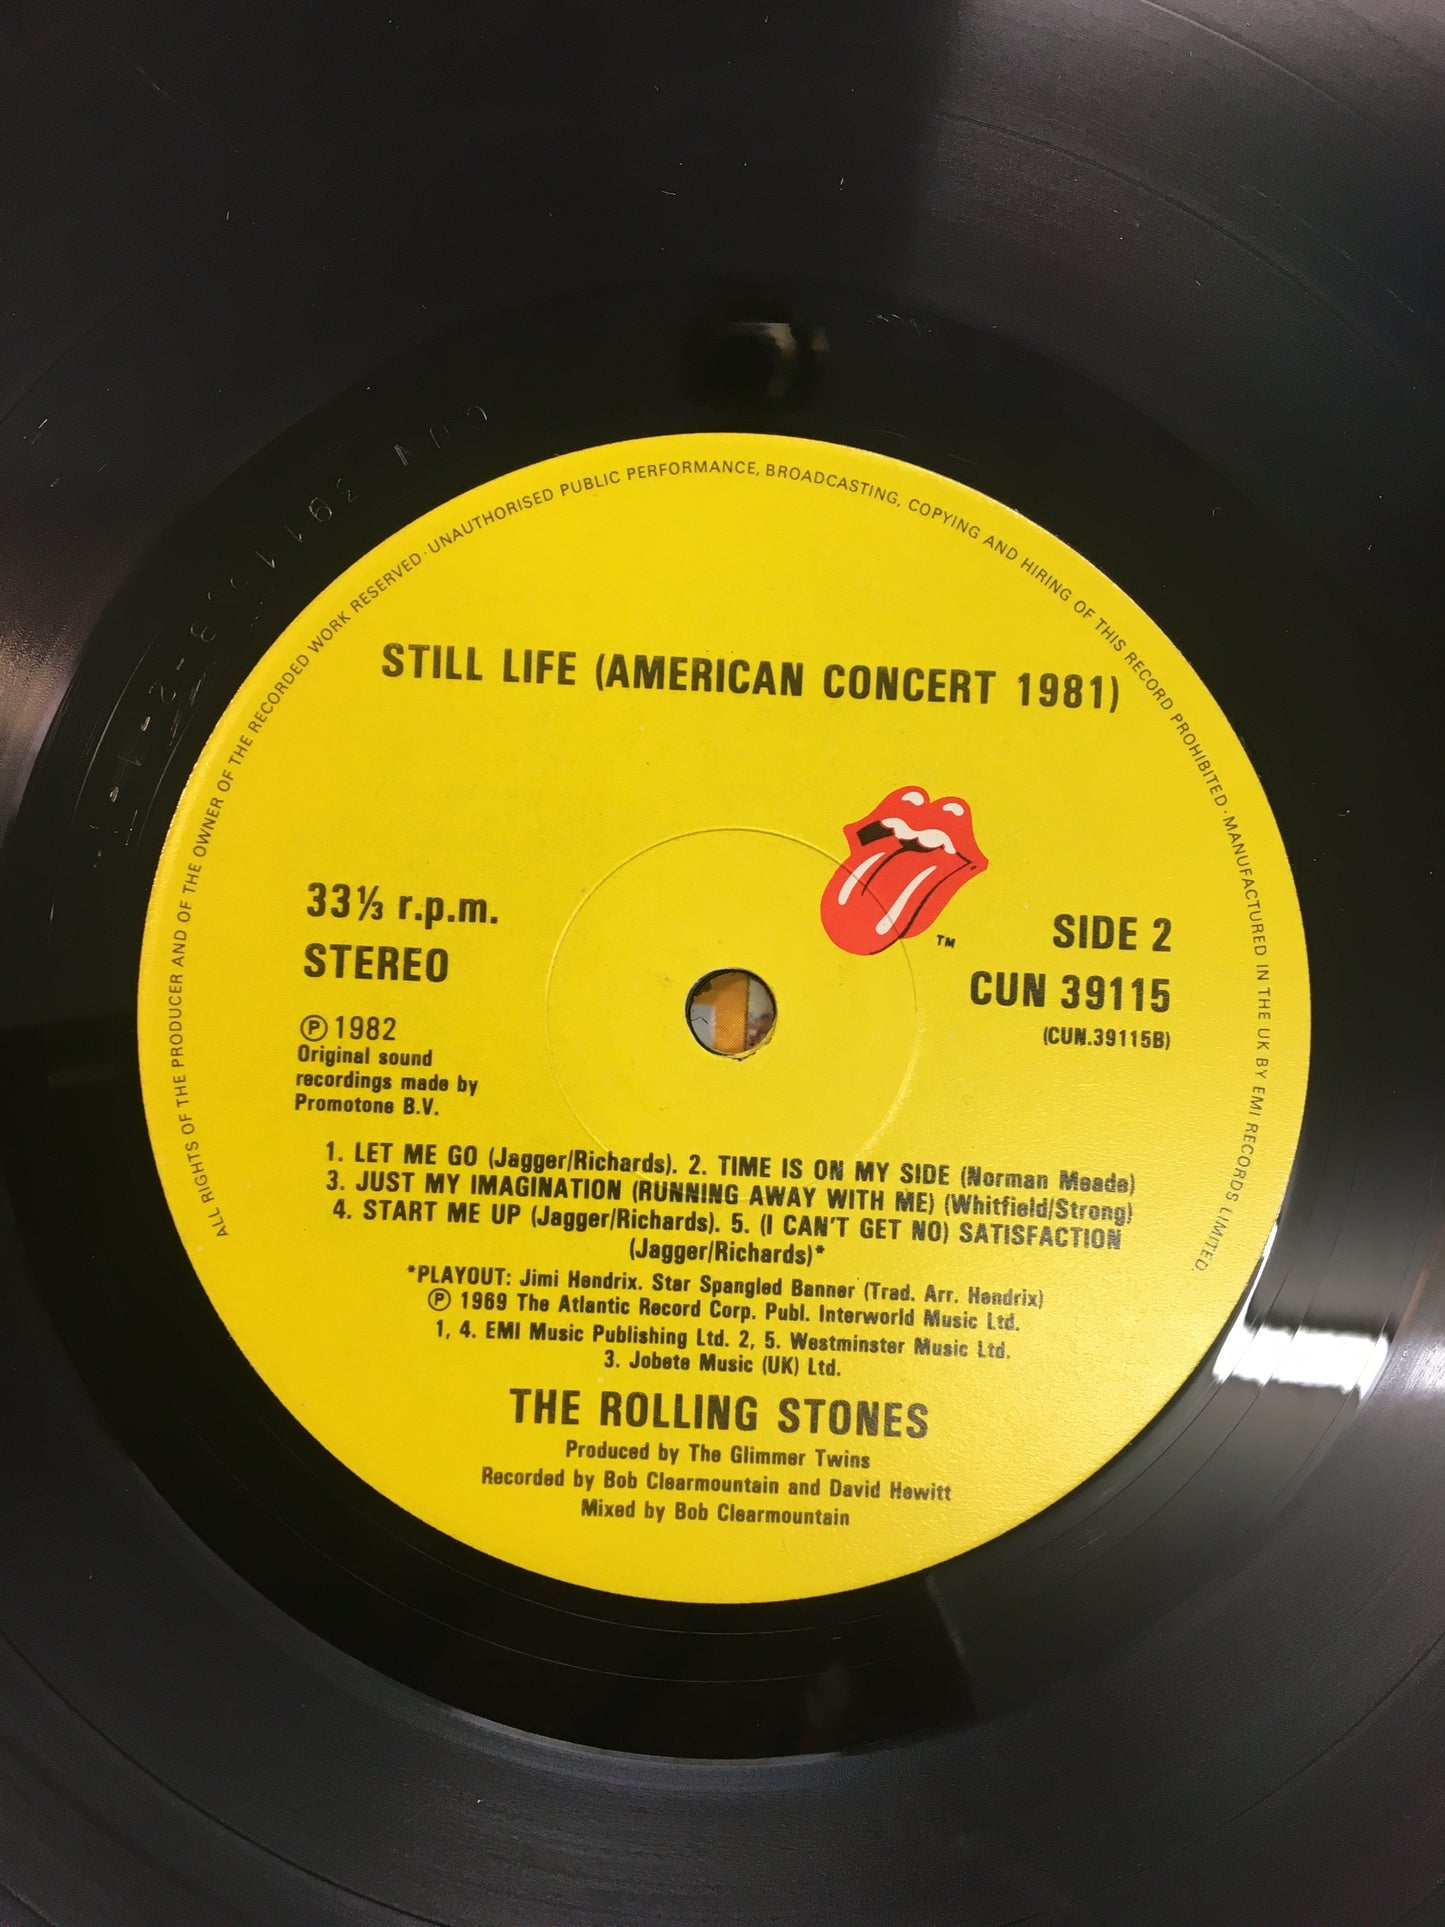 The ROLLING STONES LP ; STILL LIFE ( American concert 1981 )